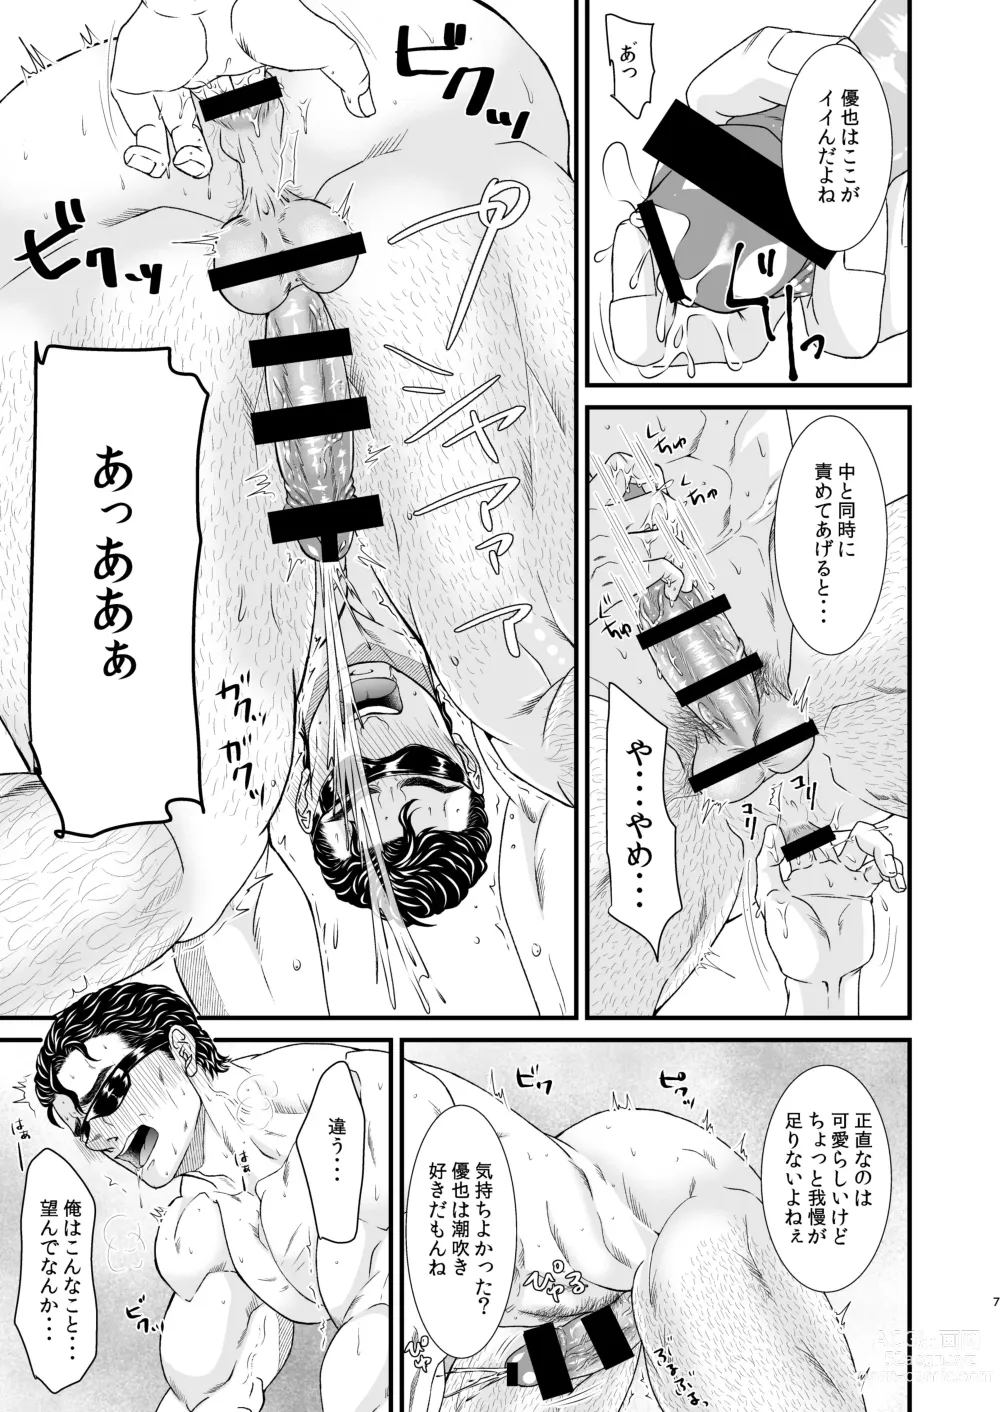 Page 6 of doujinshi Confusion